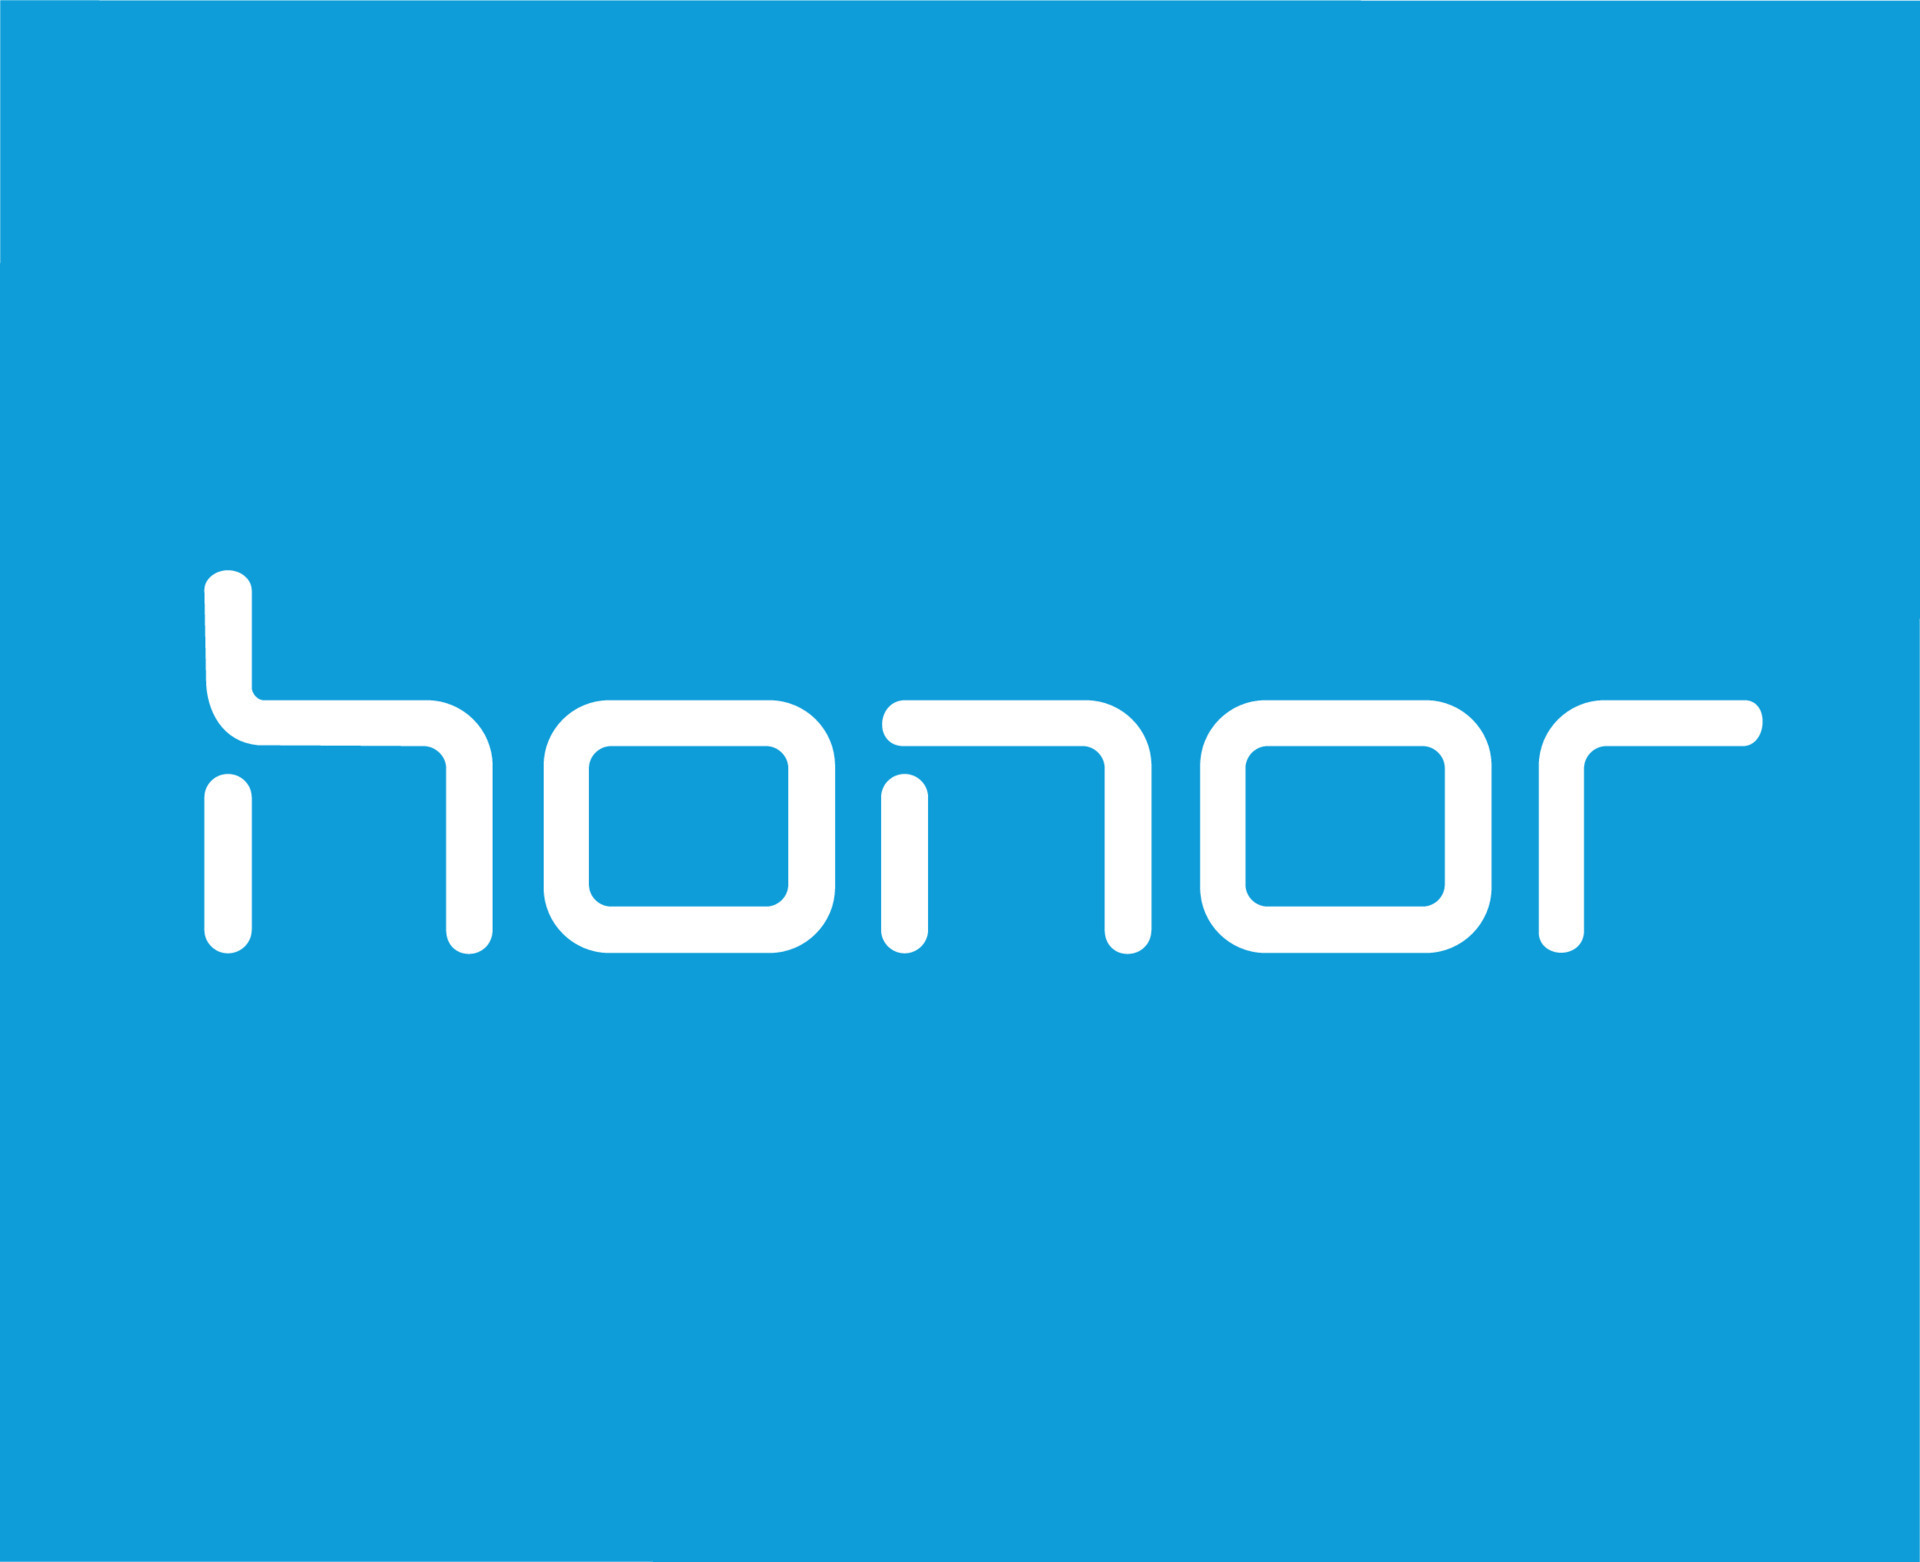 Honor-brand-logo-phone-symbol-name-white-design-china-mobile-illustration-with-blue-background-free-vector